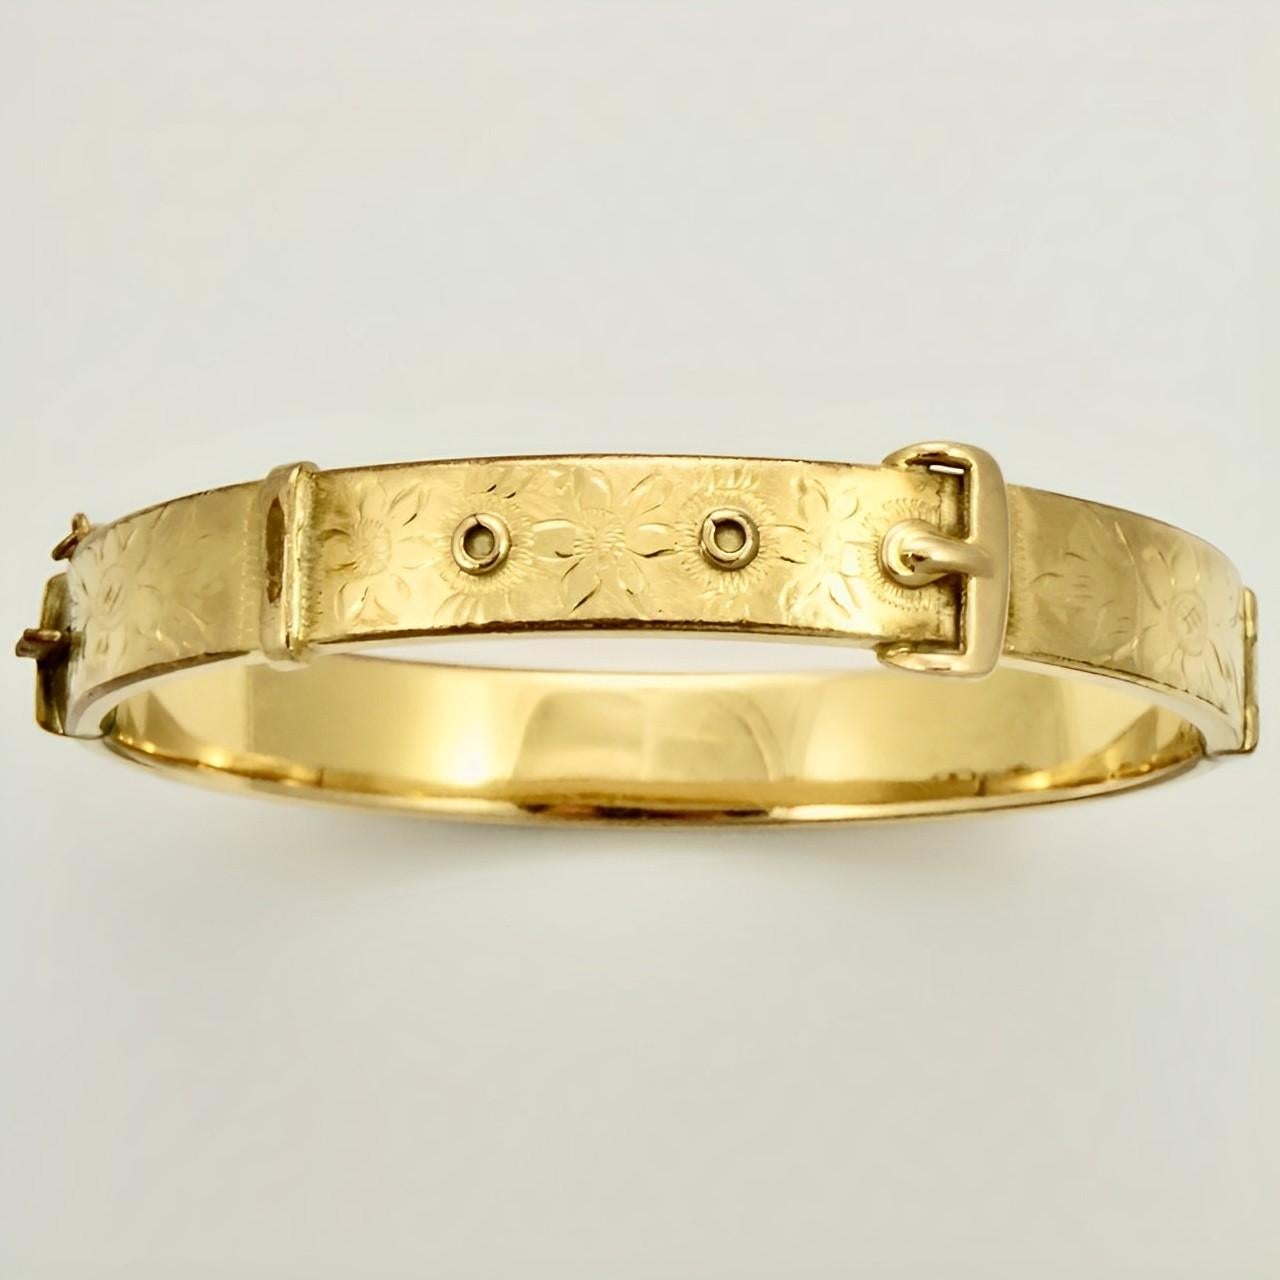 1/5th 9CT yellow rolled gold floral engraved buckle bangle bracelet, with a safety chain. It opens with a push button and the makers mark is JS. The bangle is slightly oval, the inside measurements are 6 cm / 2.3 inches by 5.4 cm / 2.1 inches, and